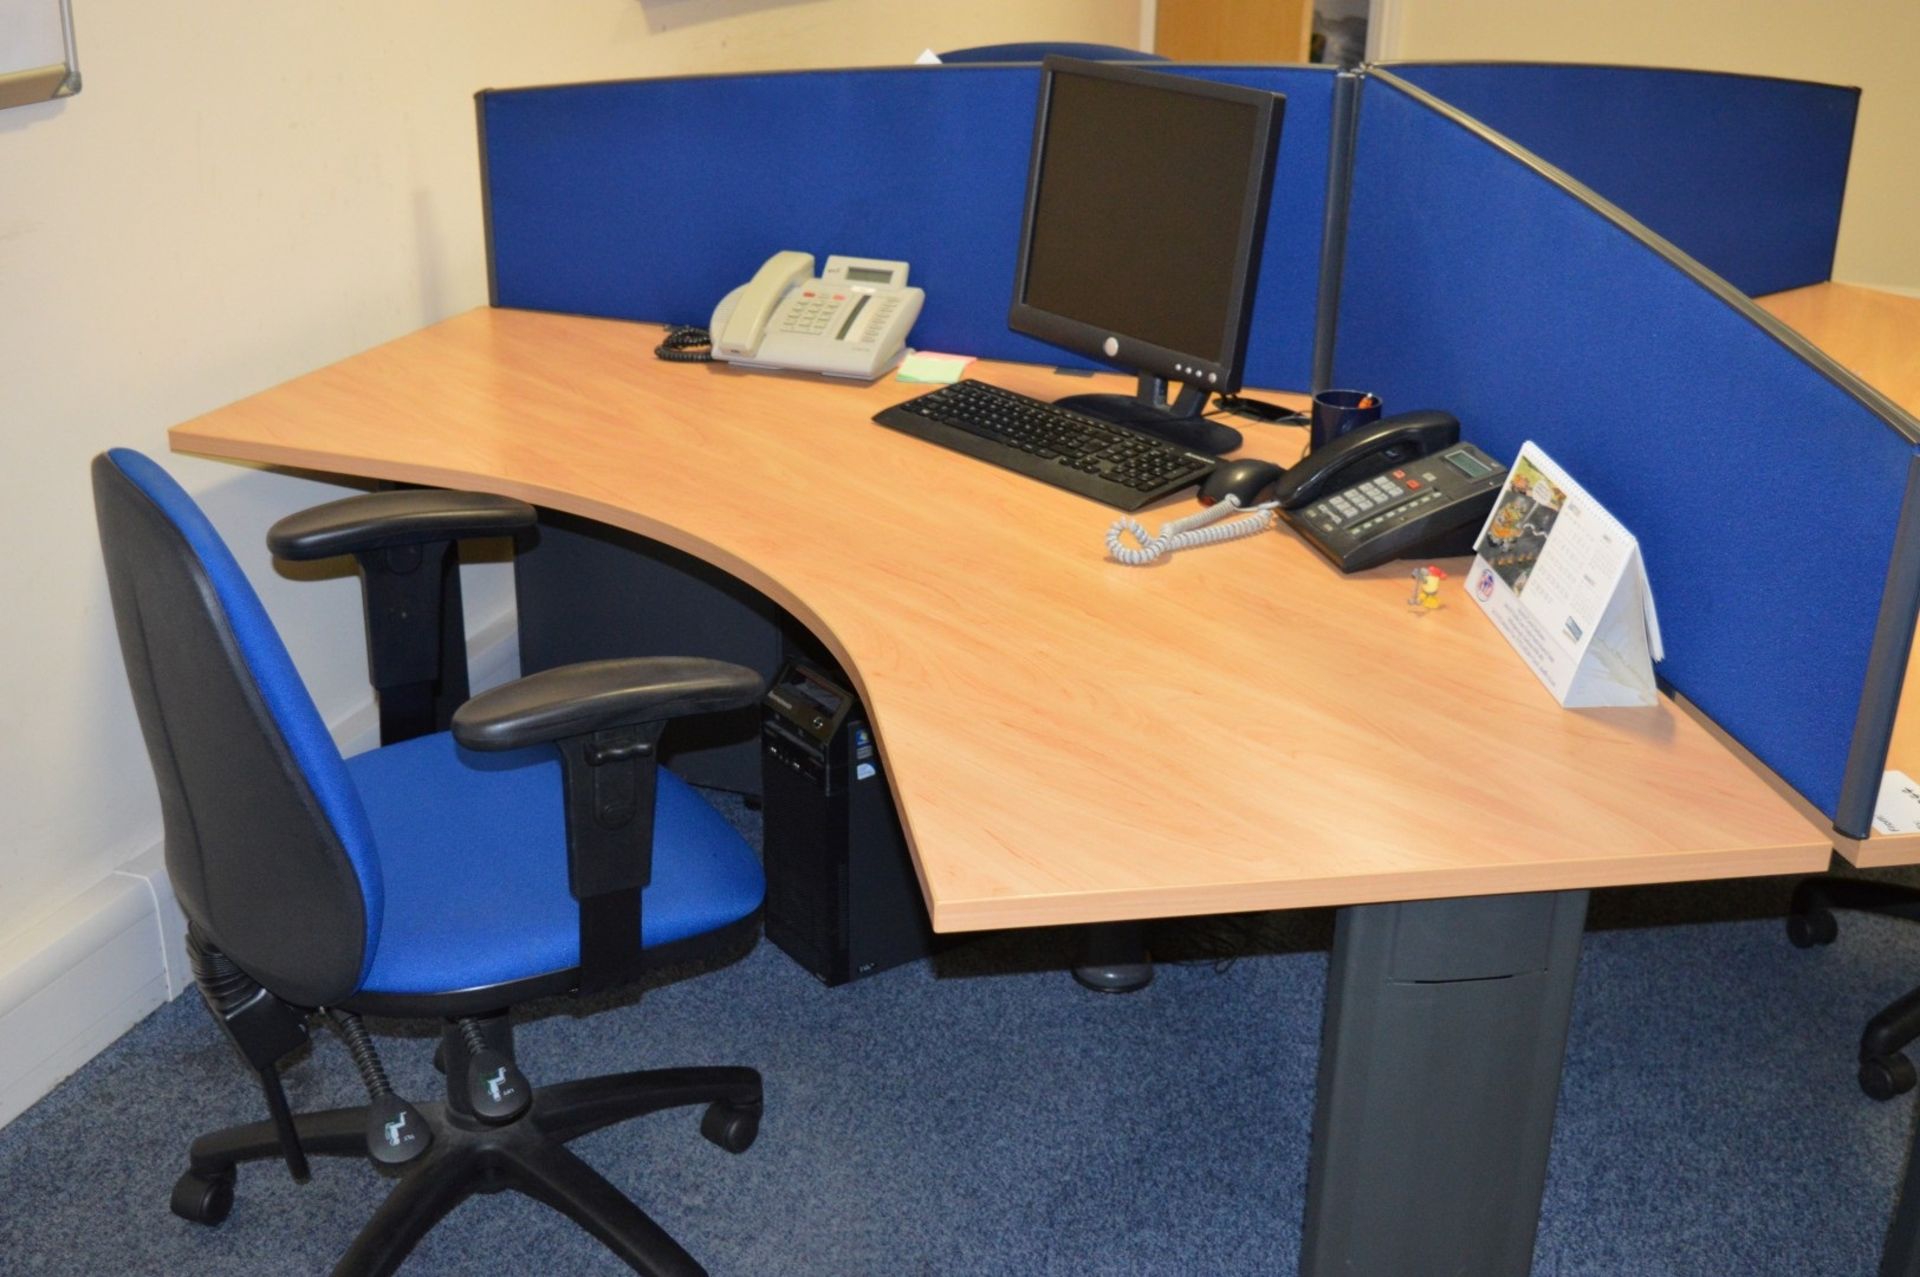 1 x Tripod Office Workstation Desk With Chairs - Suitable For 3 Users - Includes Three Premium - Image 2 of 6